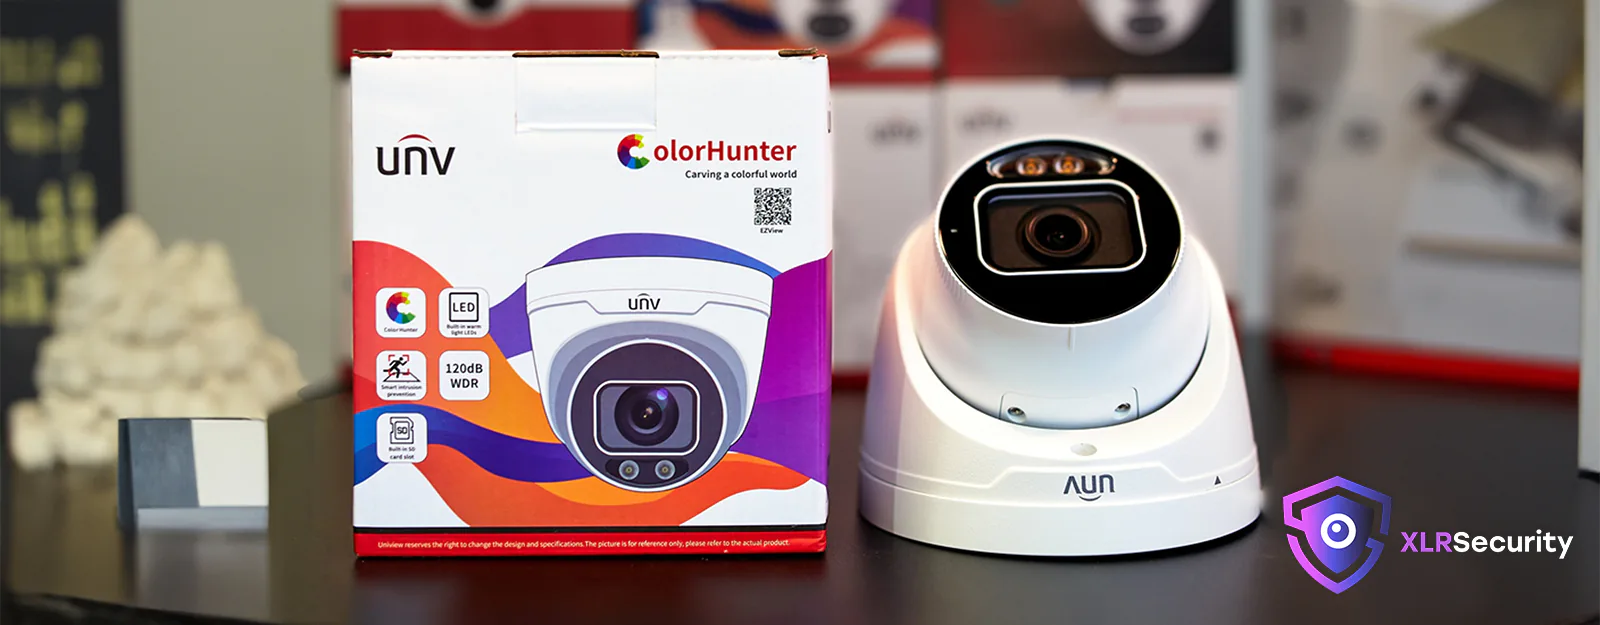 A Uniview 8MP ColorHunter camera on a black table